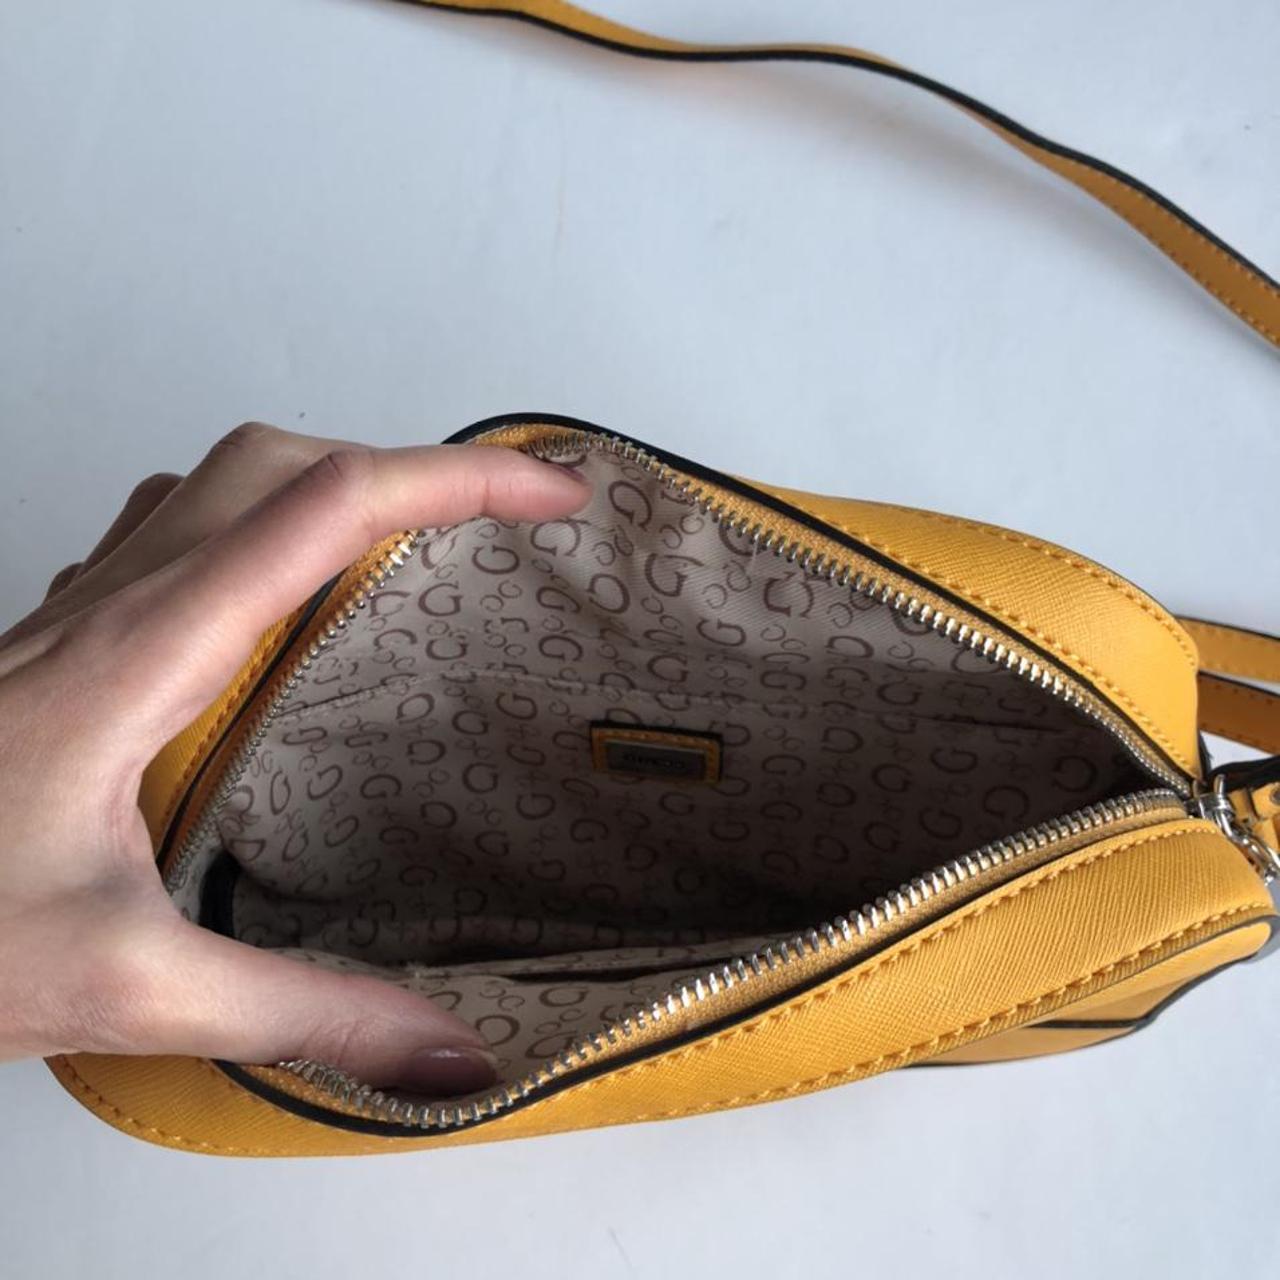 Product Image 3 - GUESS SIDE BAG IN YELLOW

Worn